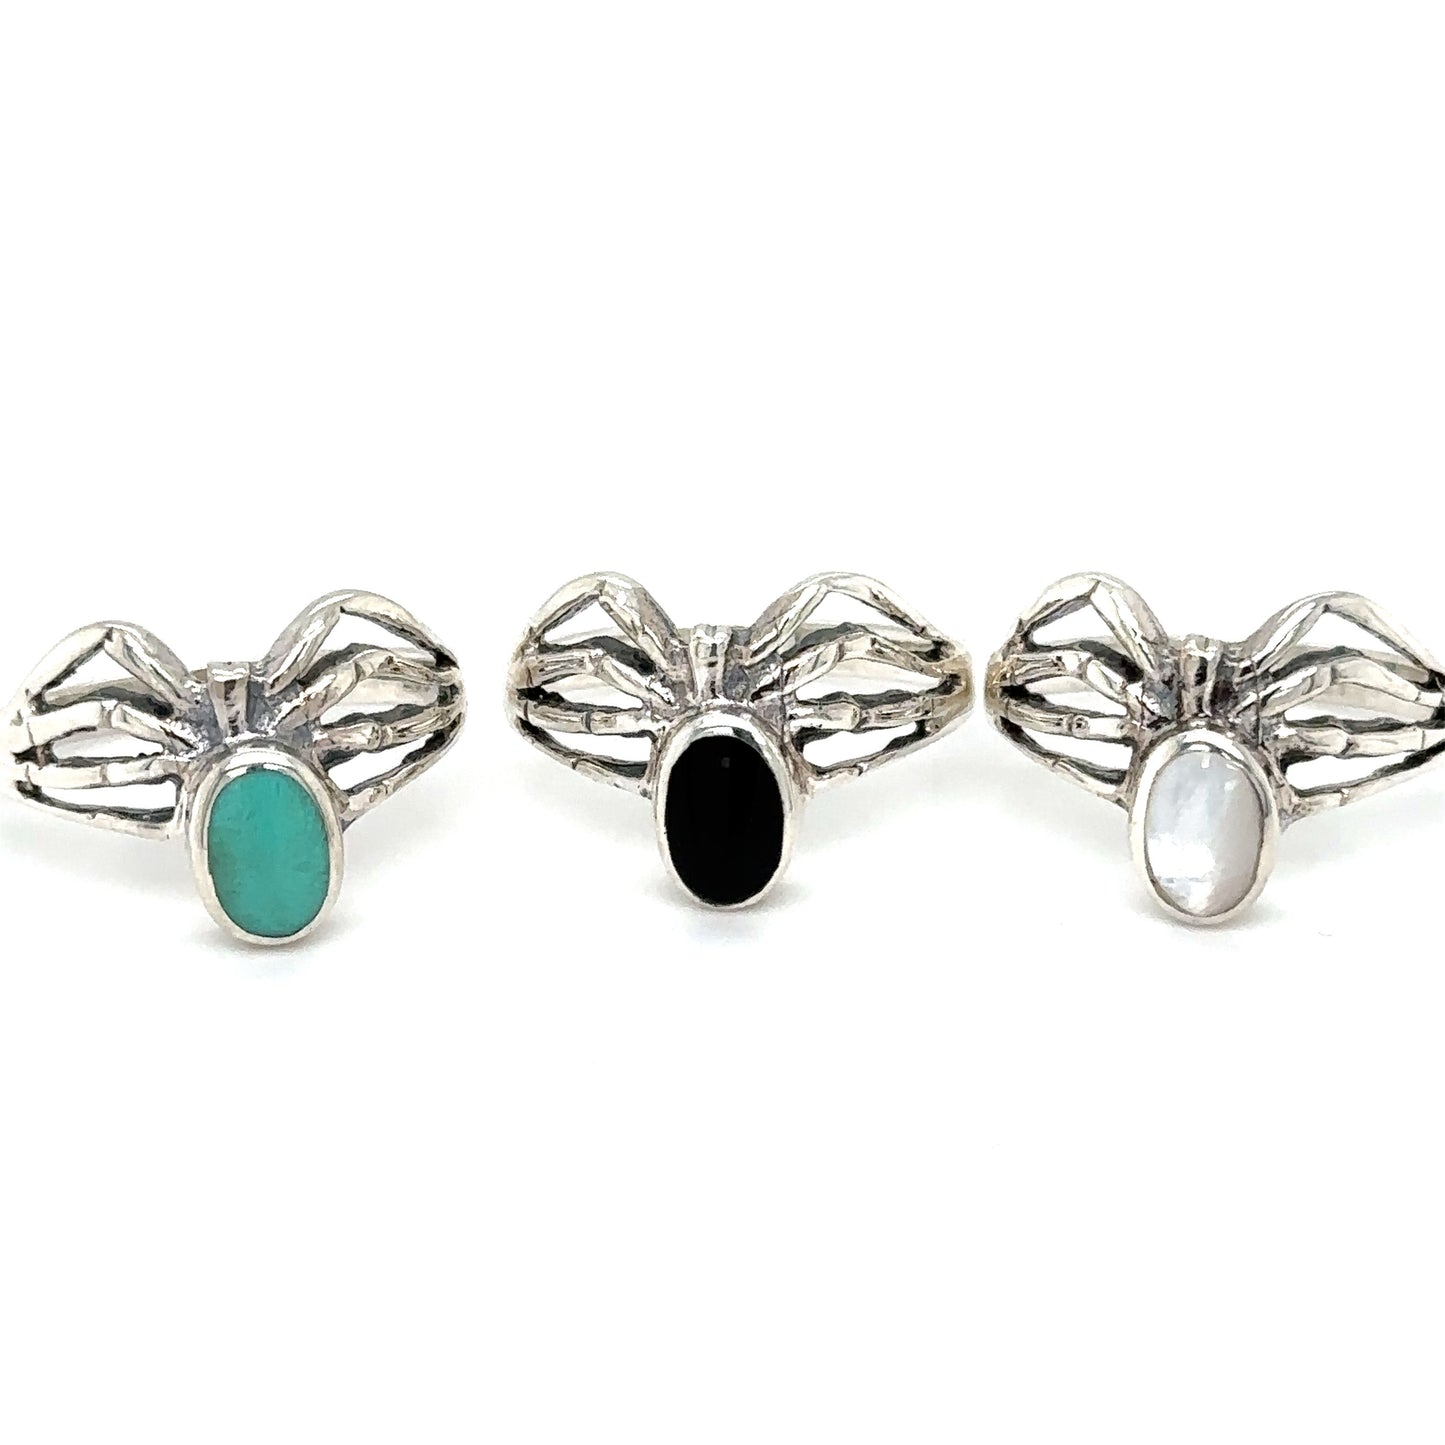 Three Super Silver Inlay Stone Spider rings with turquoise and black stones.